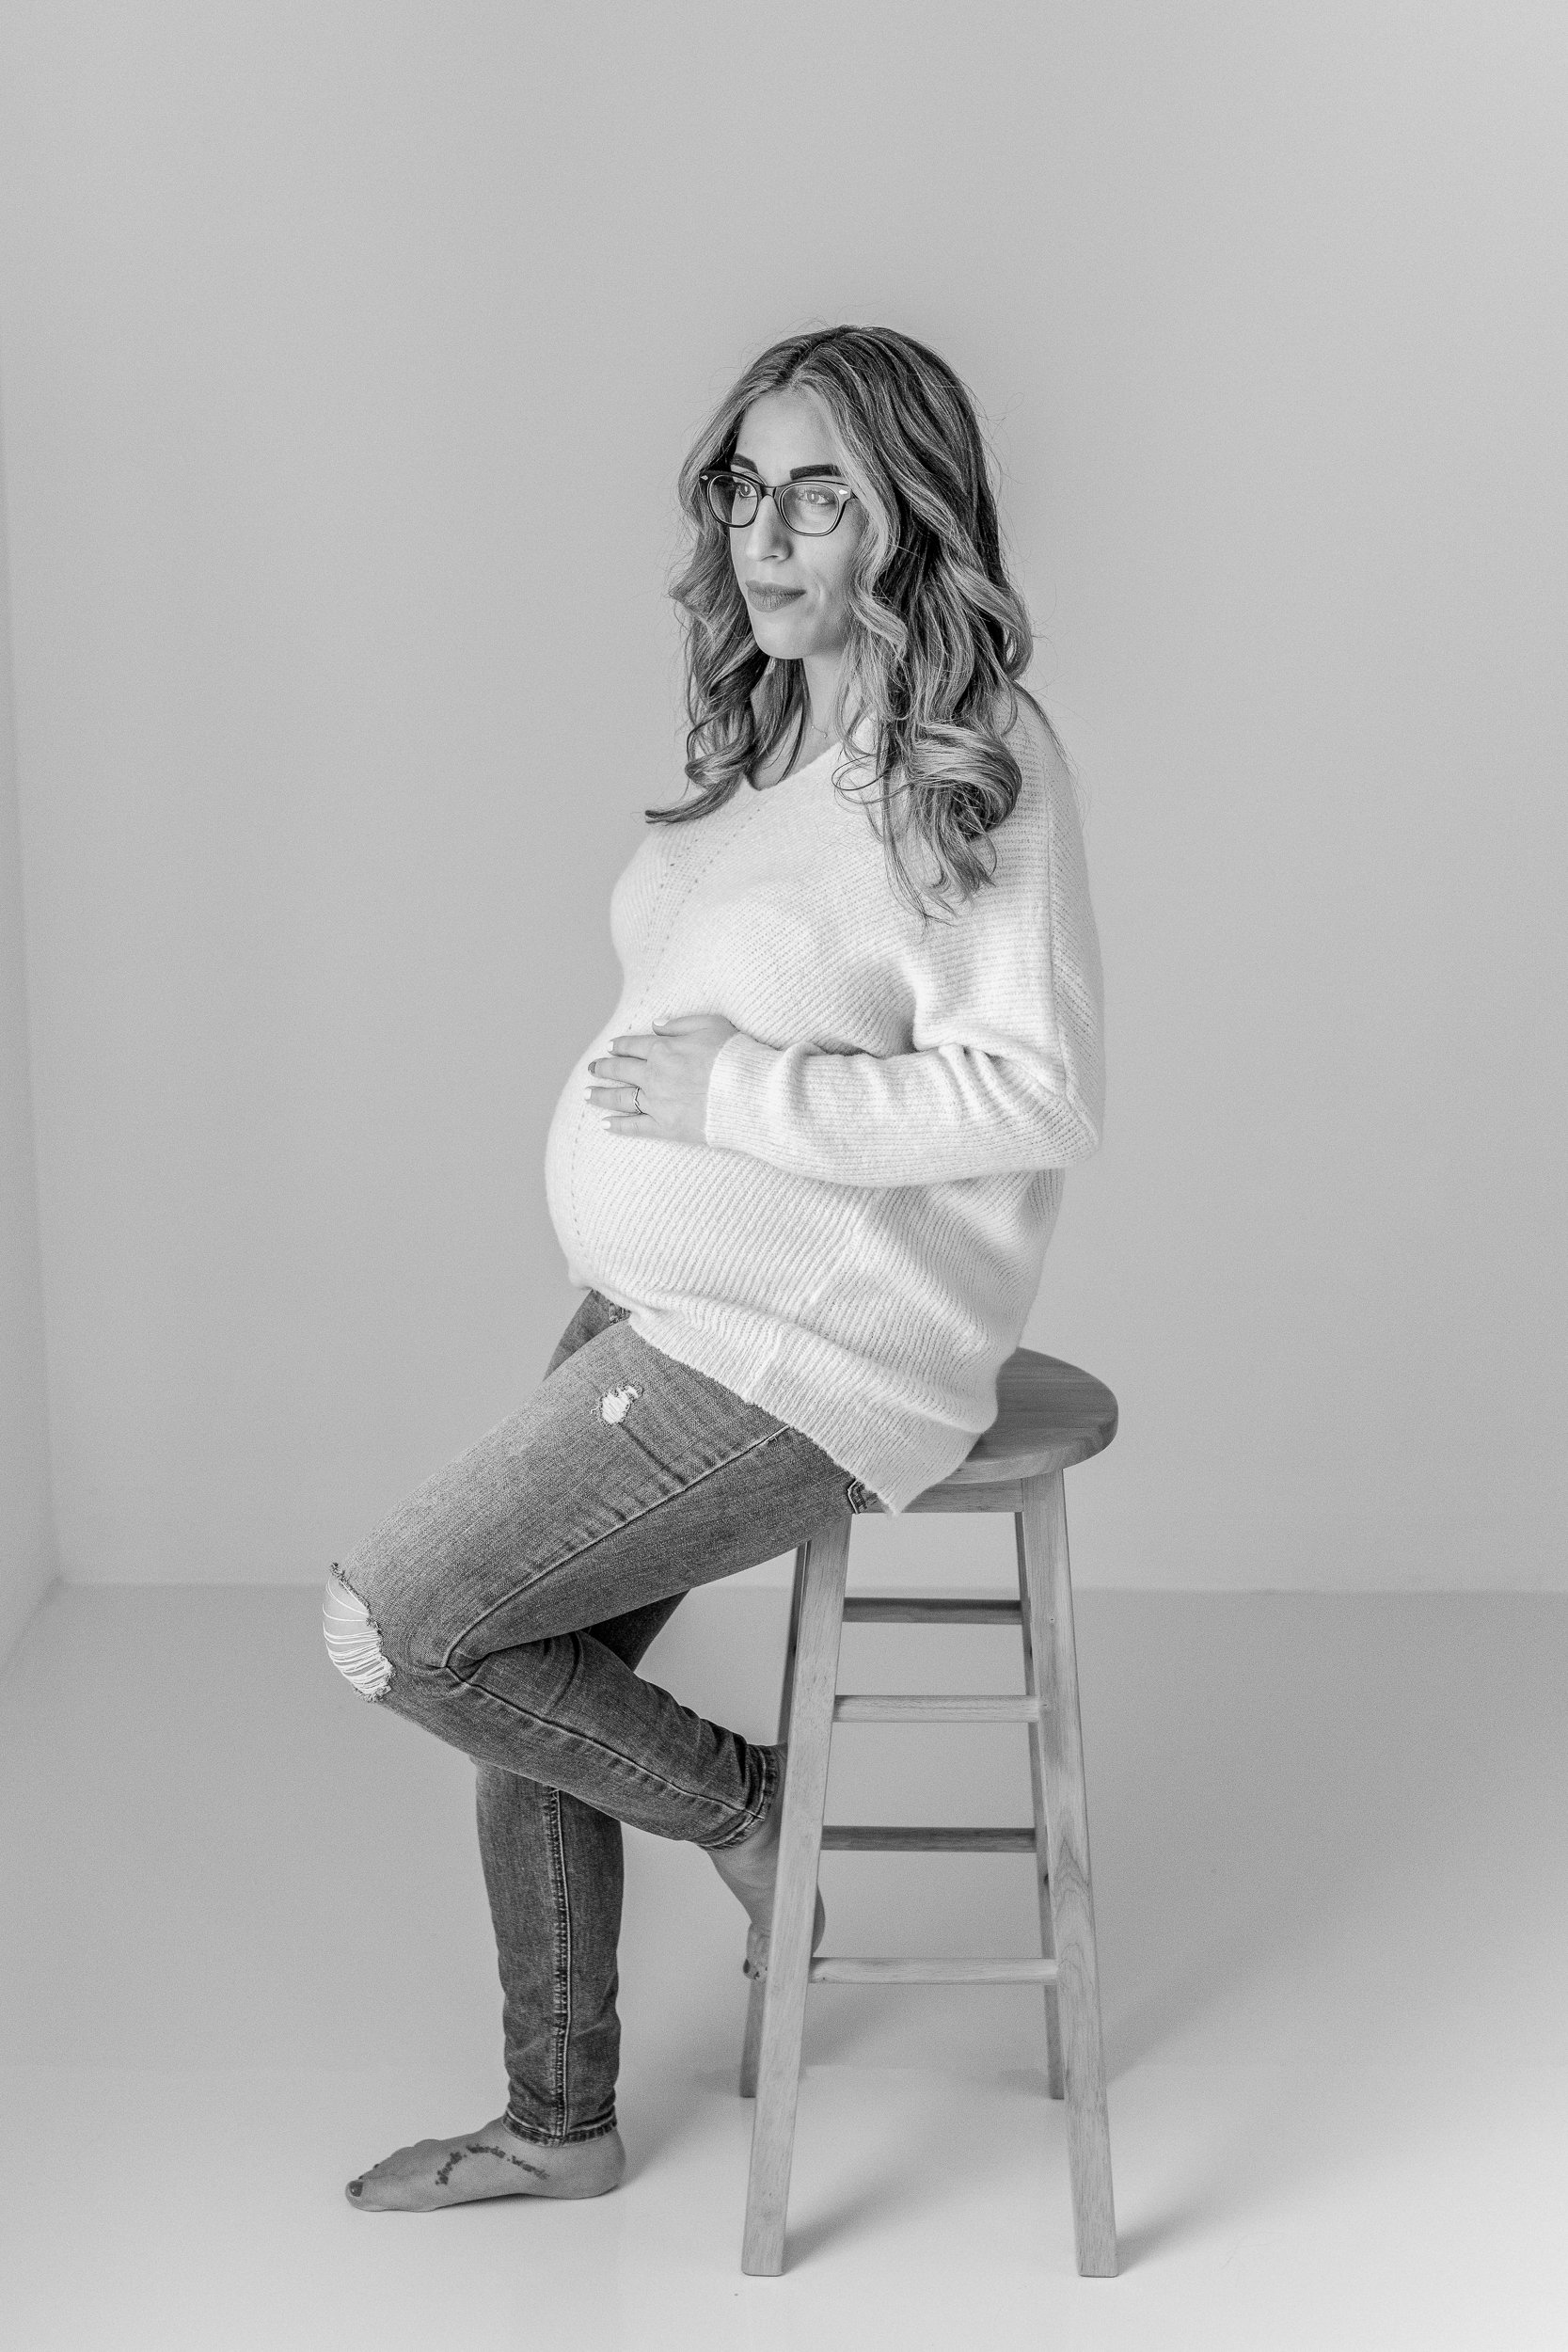  A pregnant woman sits on a stool during a studio session with modern chic style by Nicole Hawkins Photography. modern chic maternity pics NJ #NicoleHawkinsPhotography #maternitysession #NJmaternityphotographer #NewJerseyphotographers #maternityphoto